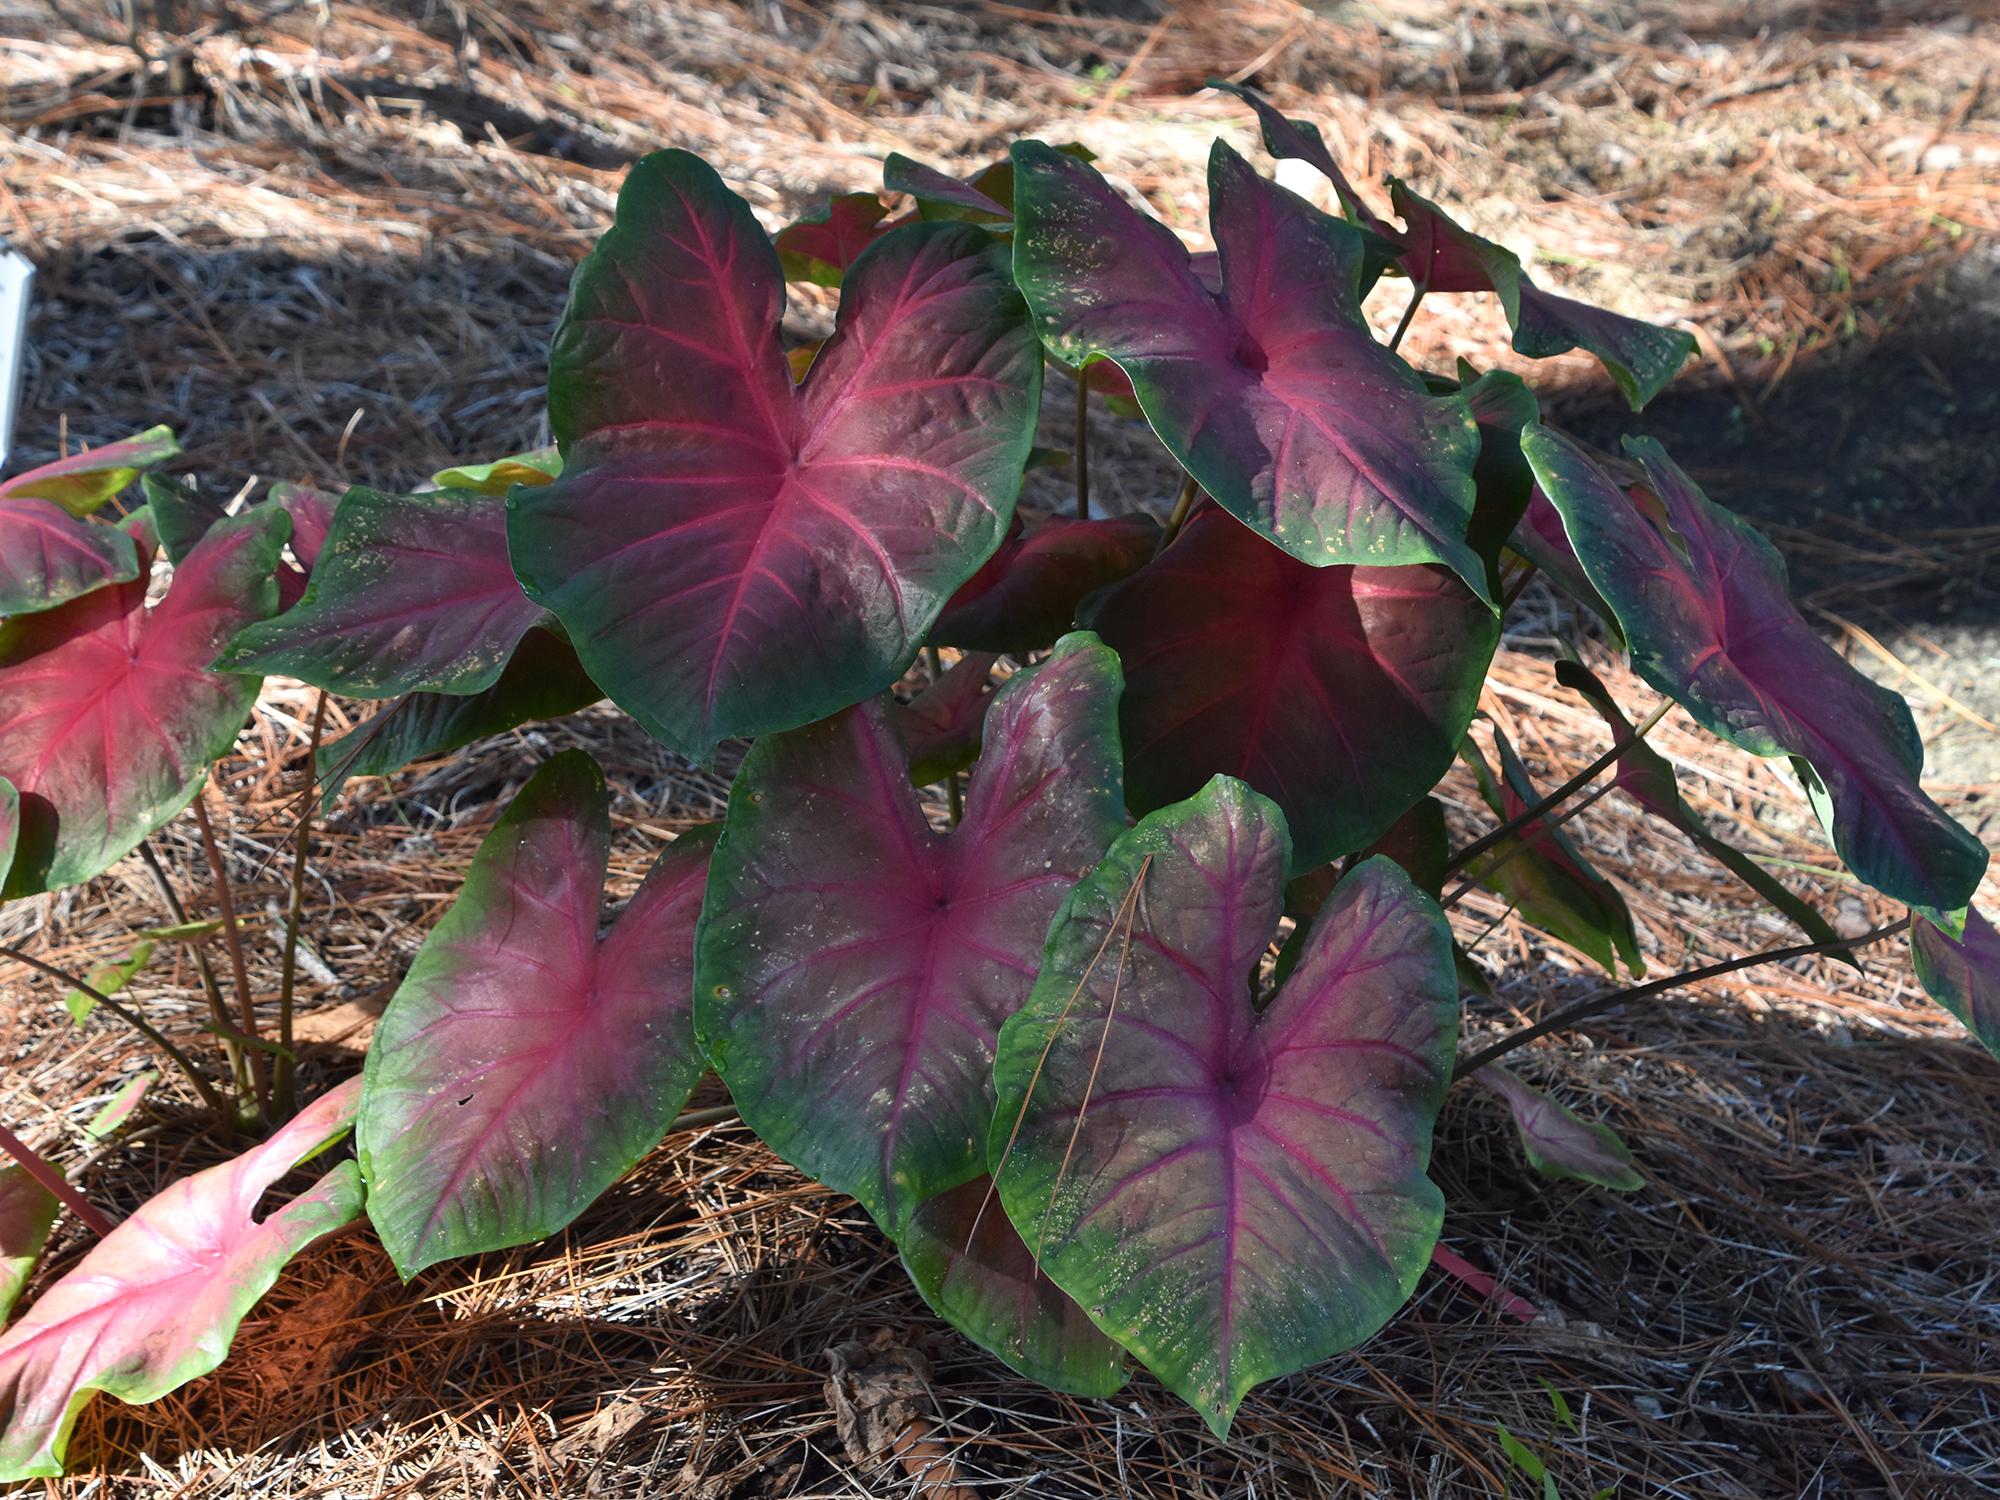 This Red-Bellied Tree Frog caladium comes from a family of caladiums that performs well in both partial and full sun. (Photo by MSU Extension/Gary Bachman)